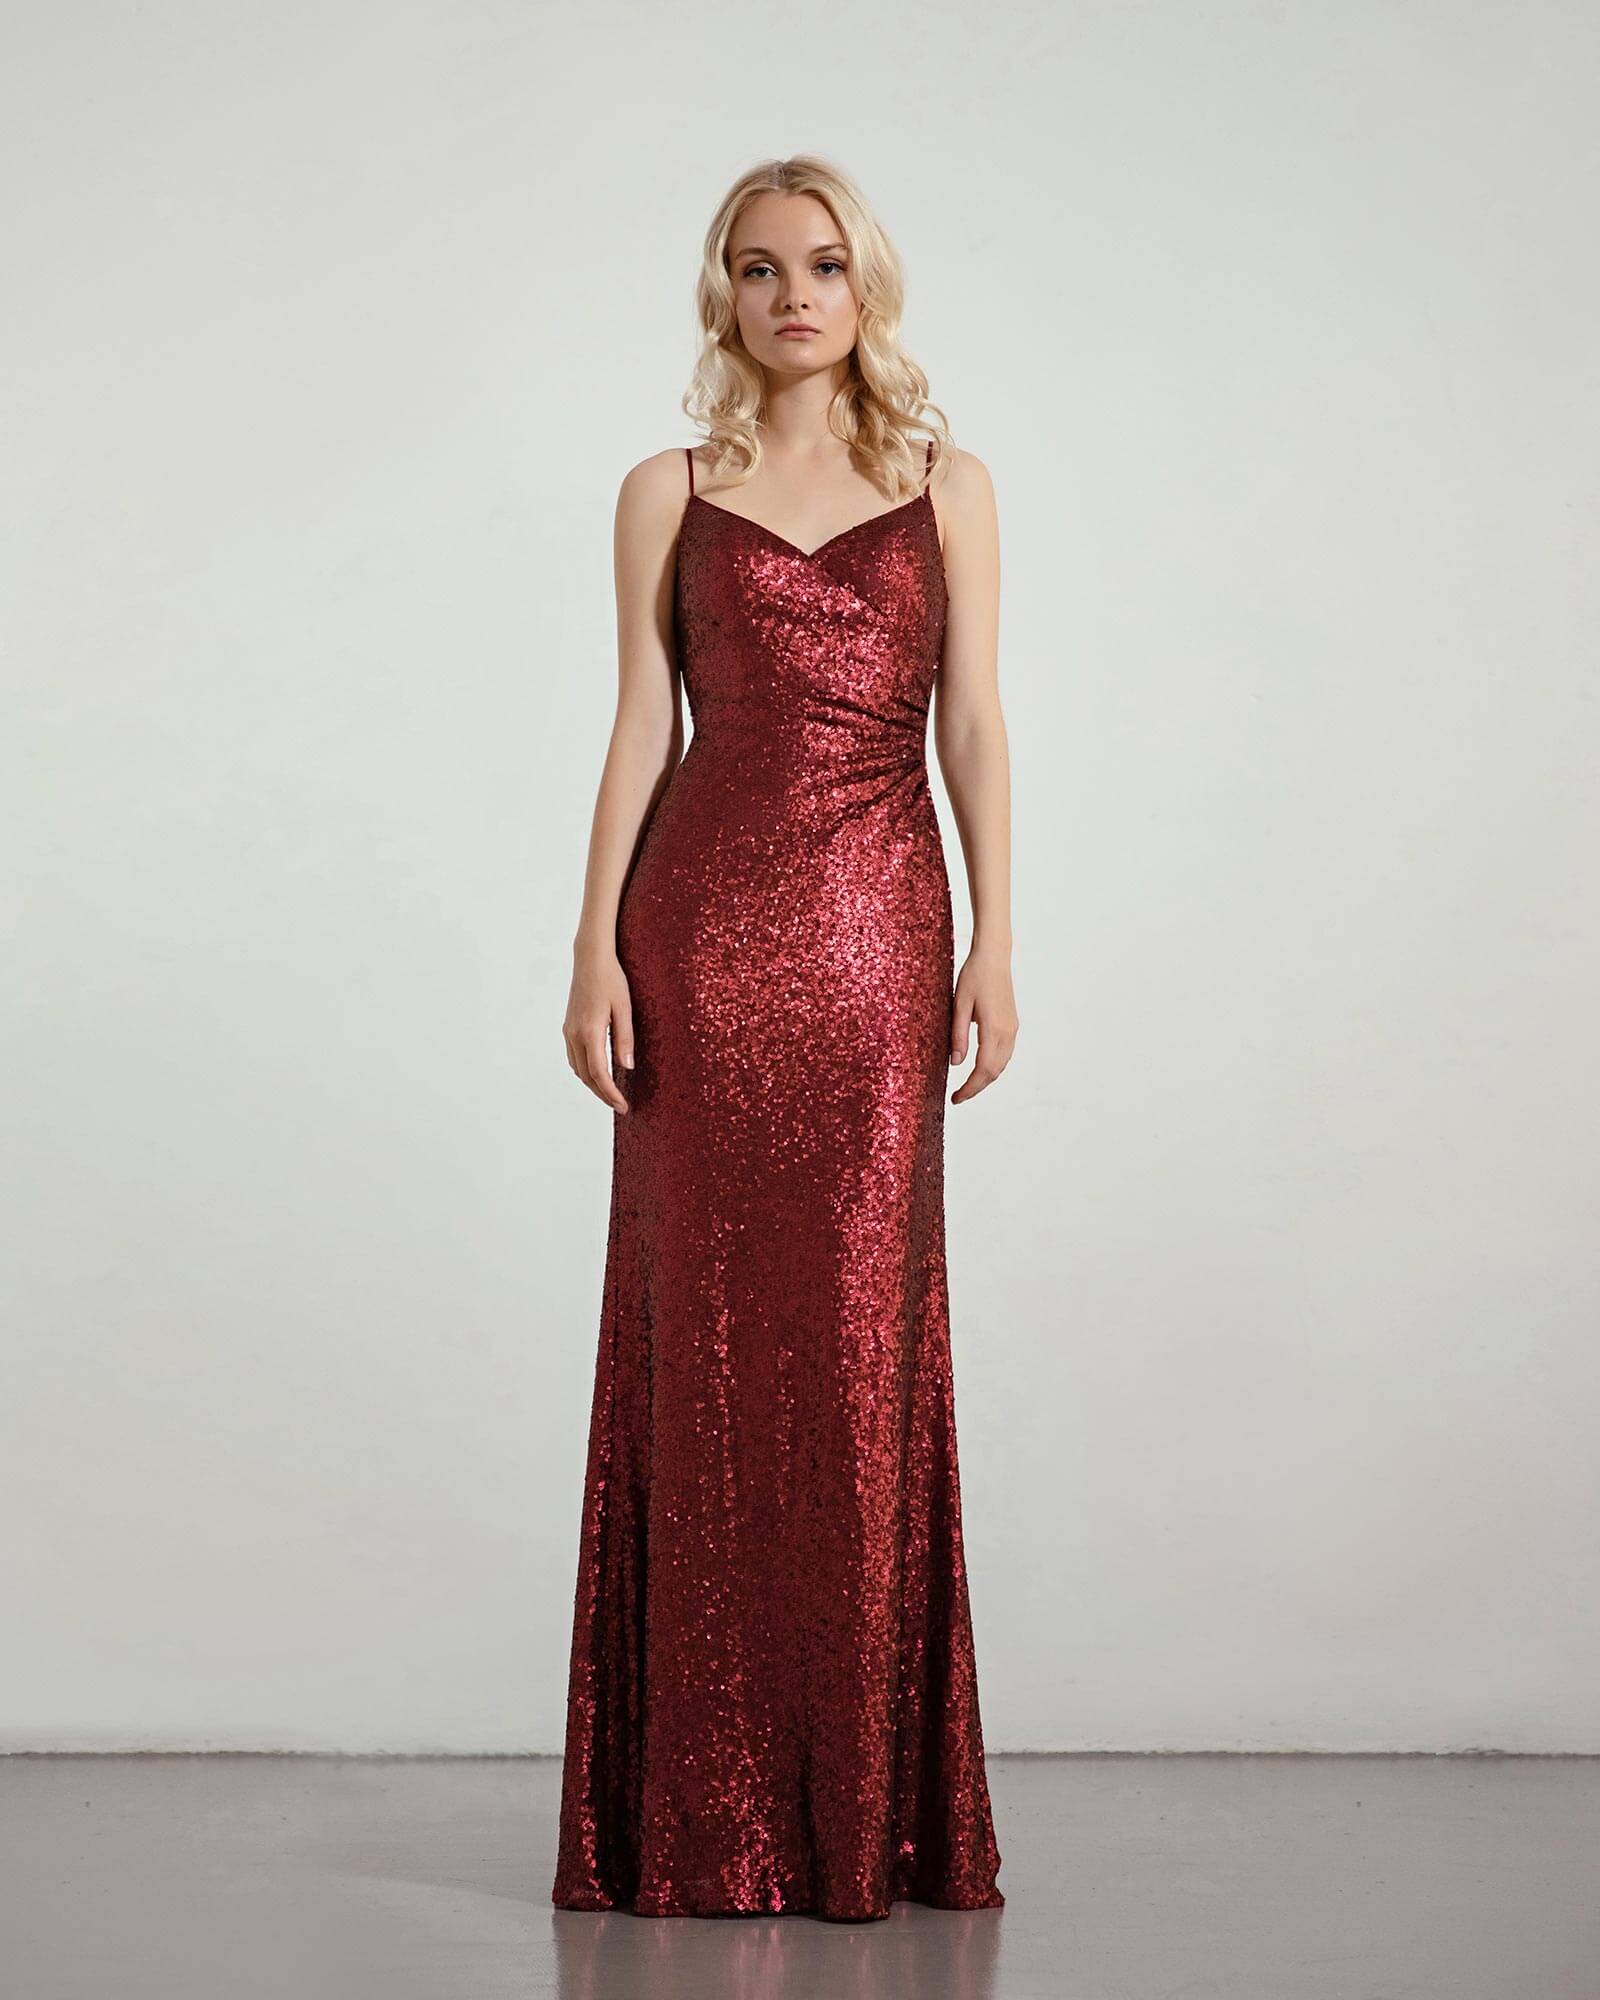 7 Big Bridesmaid Dress Trends for 2020 (With Recommendations ...